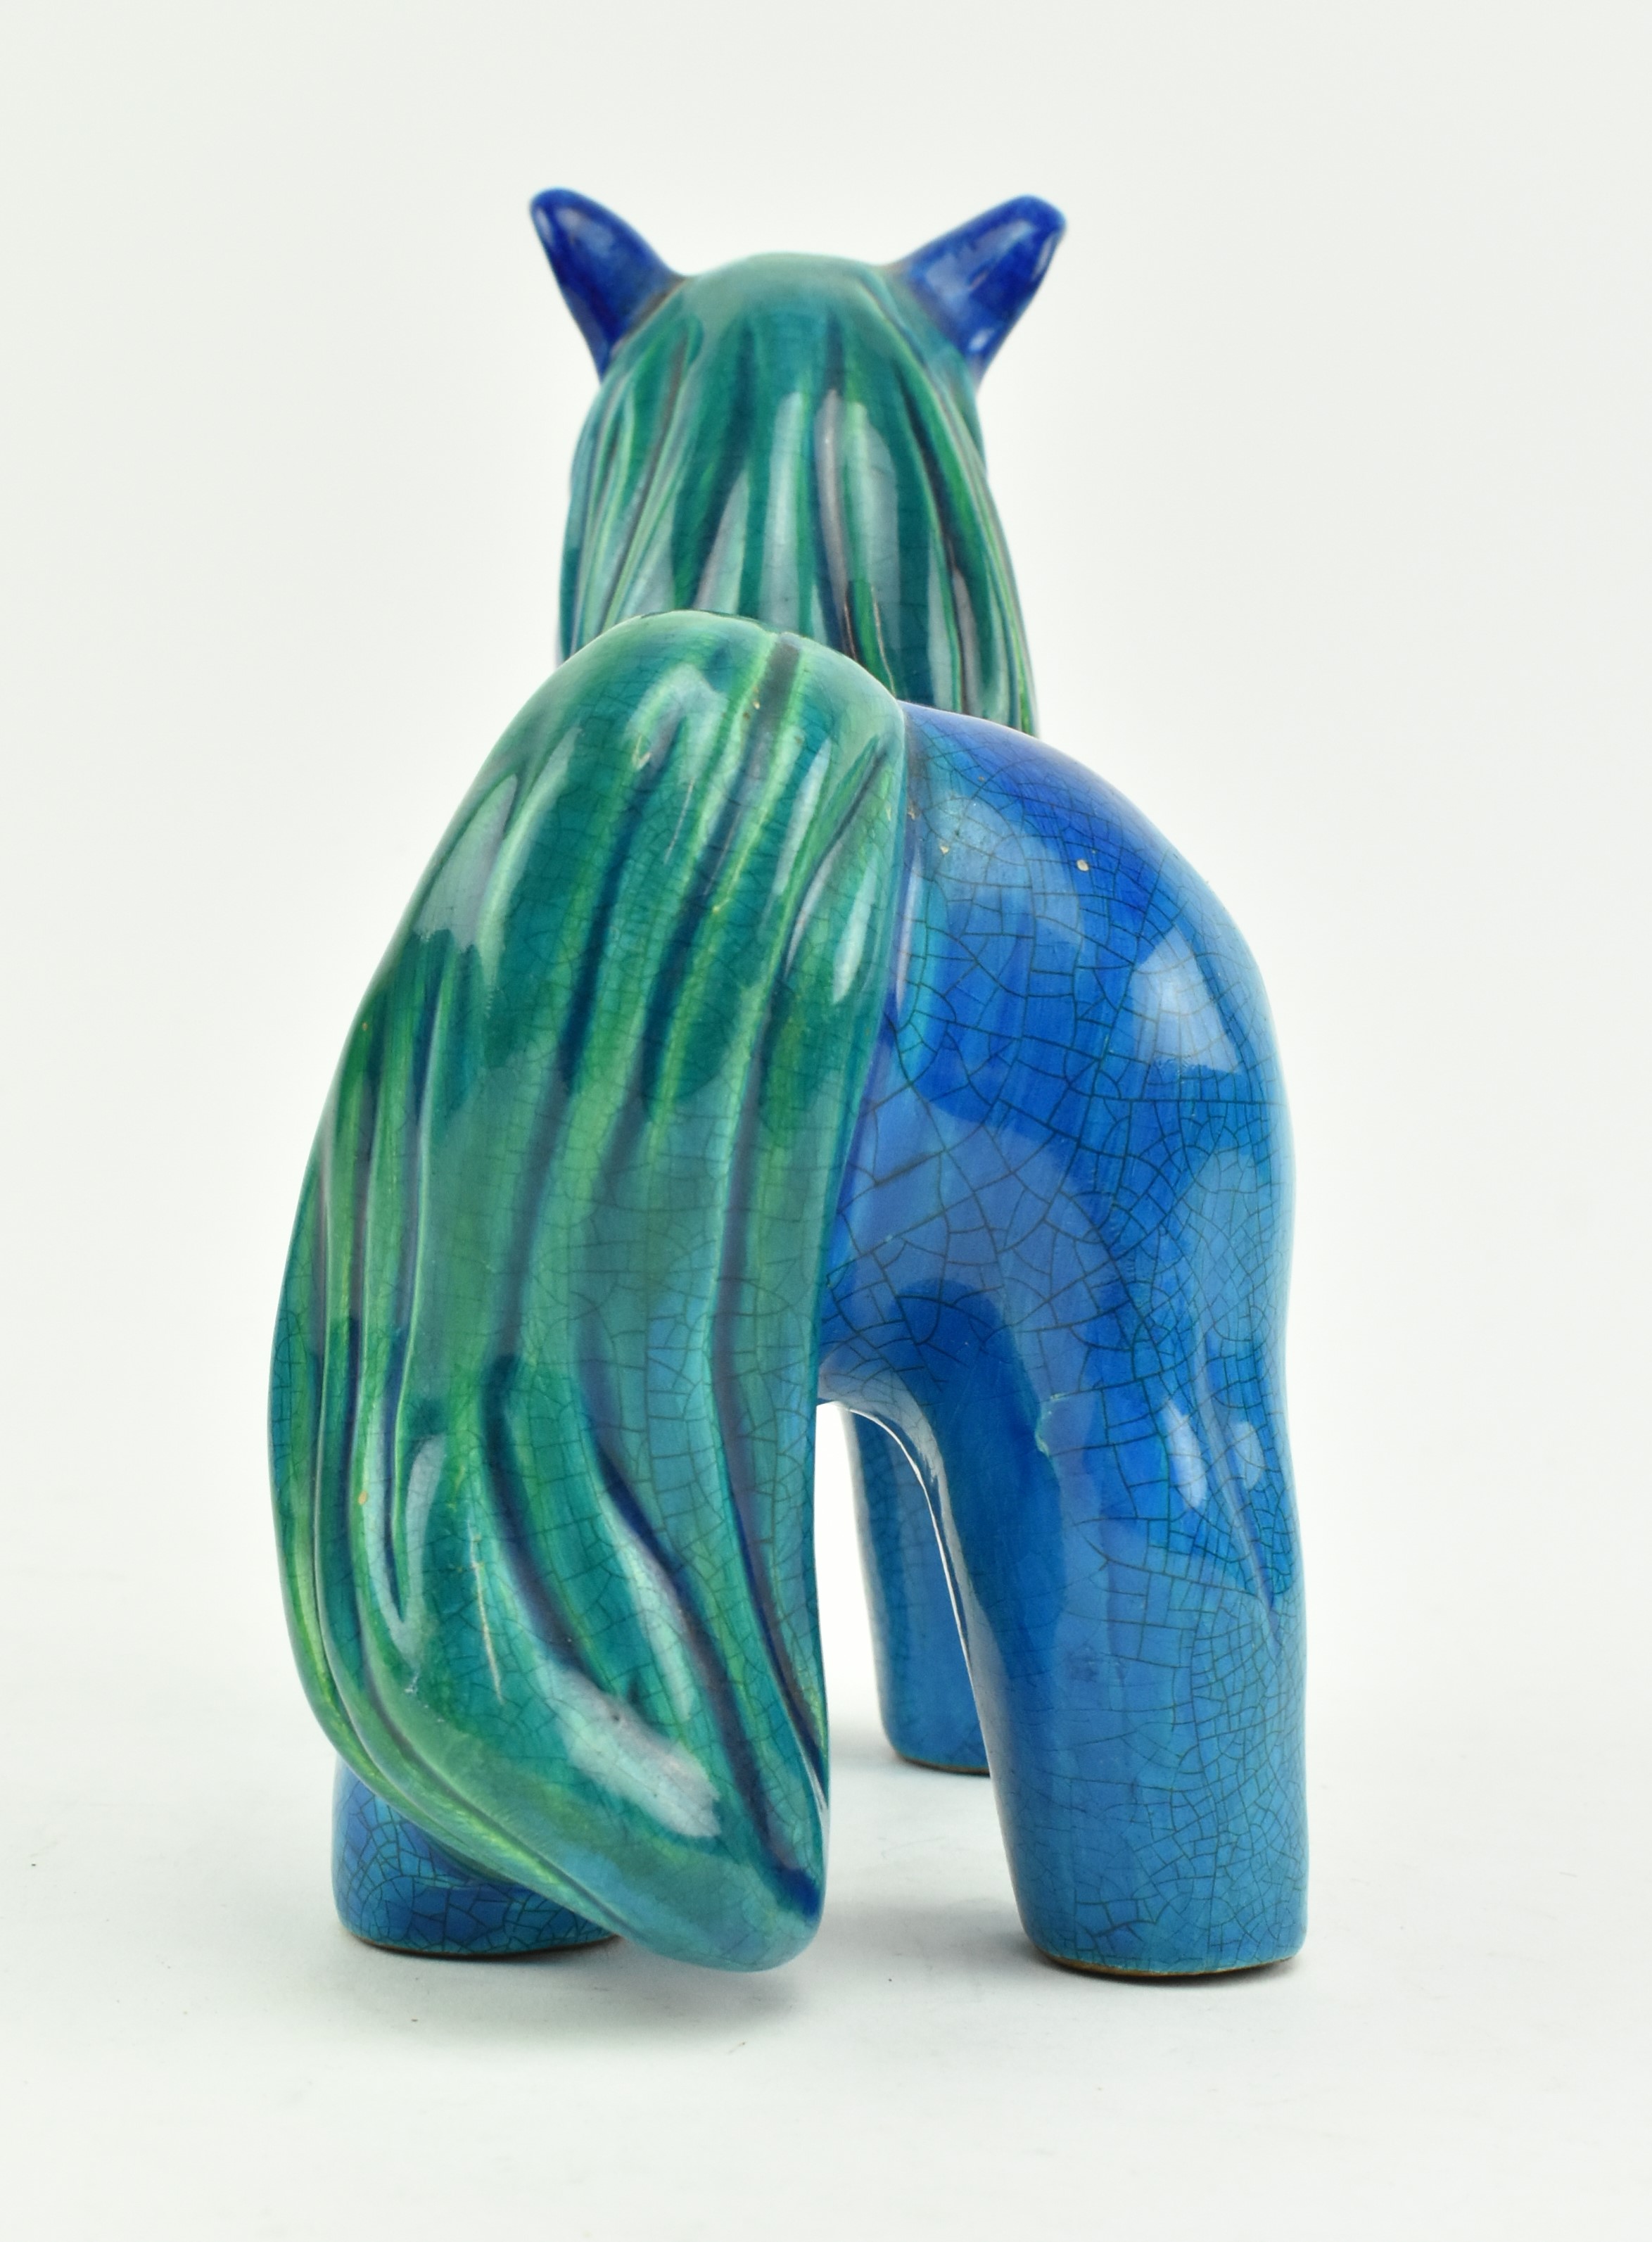 VINTAGE ITALIAN CERAMIC HORSE IN THE STYLE OF BITOSSI - Image 4 of 6